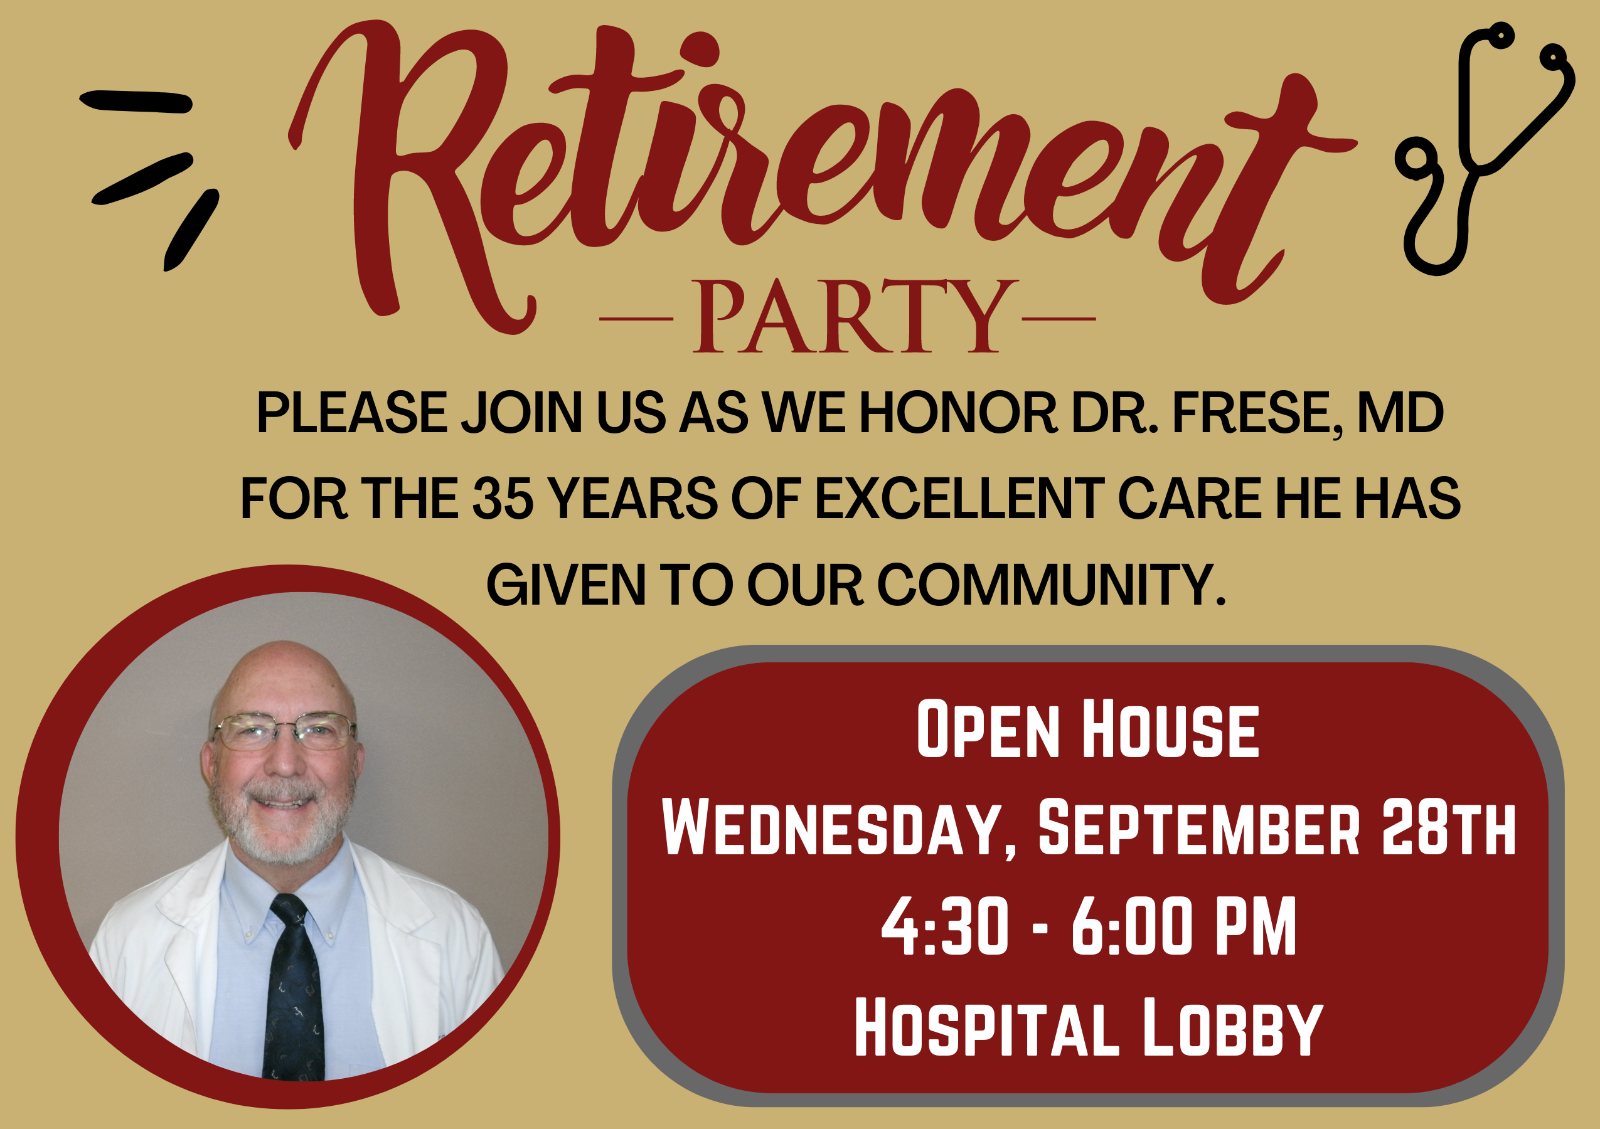 frese%20retirement%20party.png